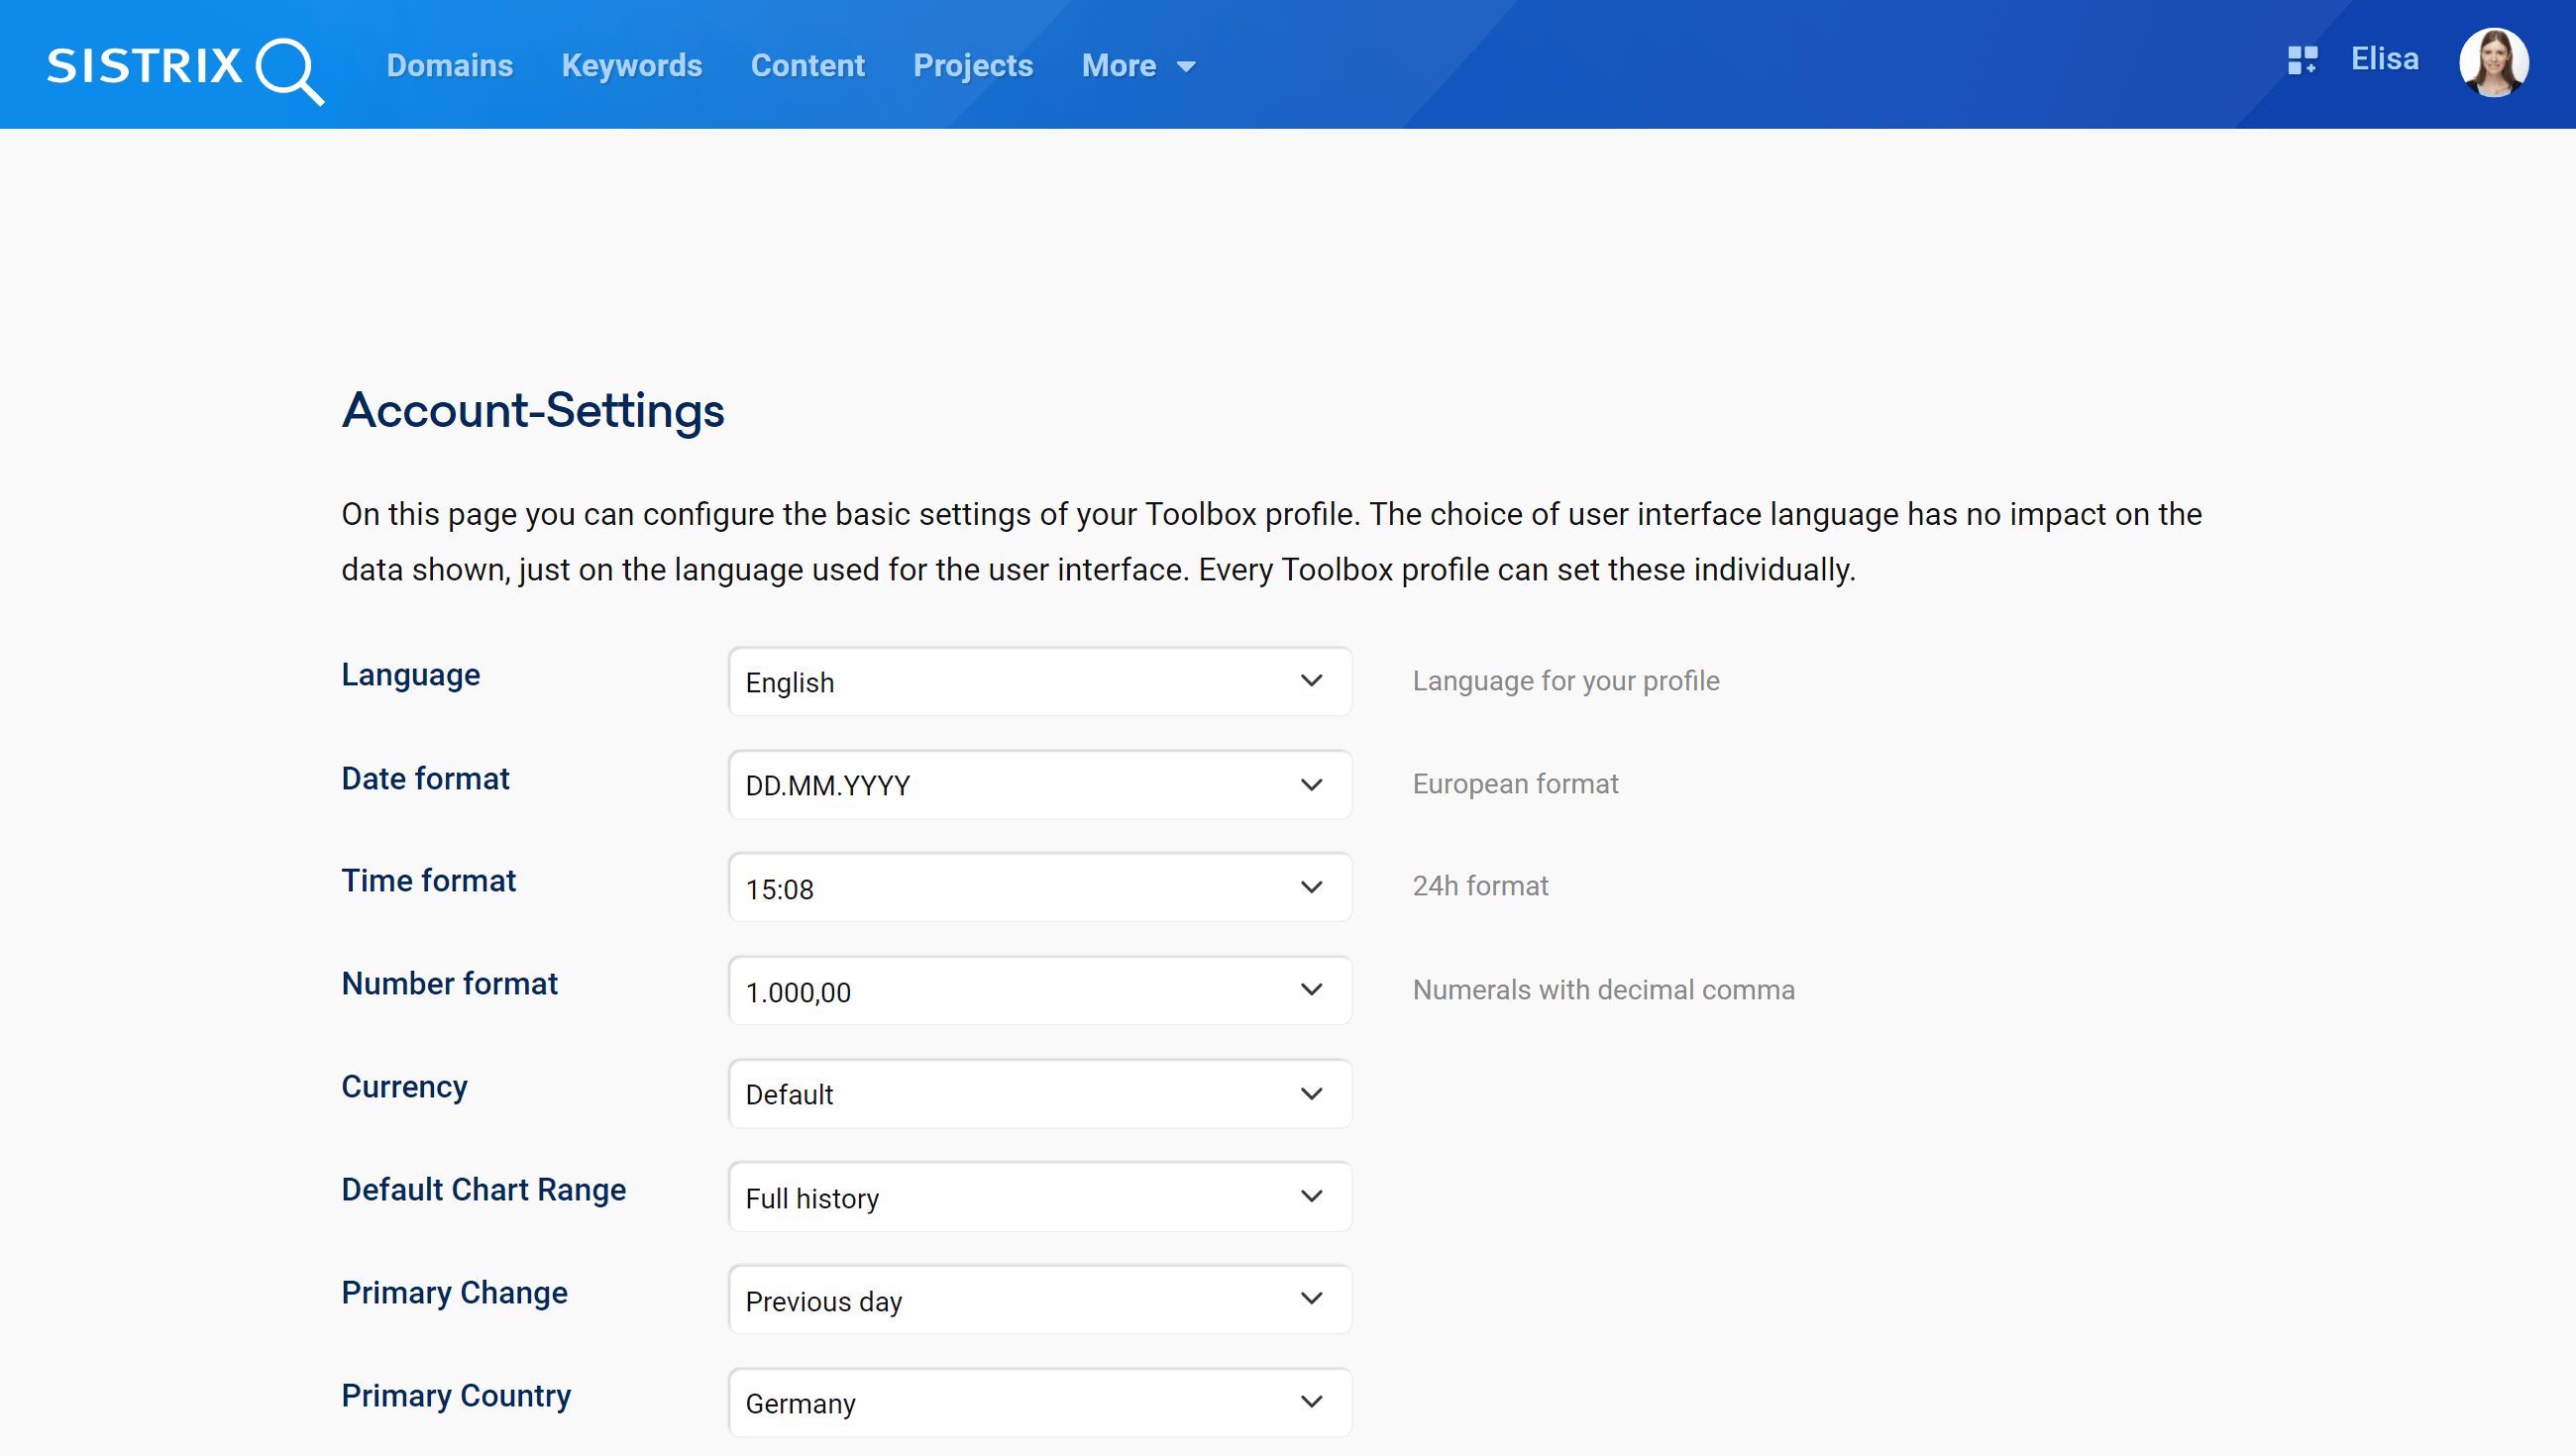 The account-settings in the Toolbox